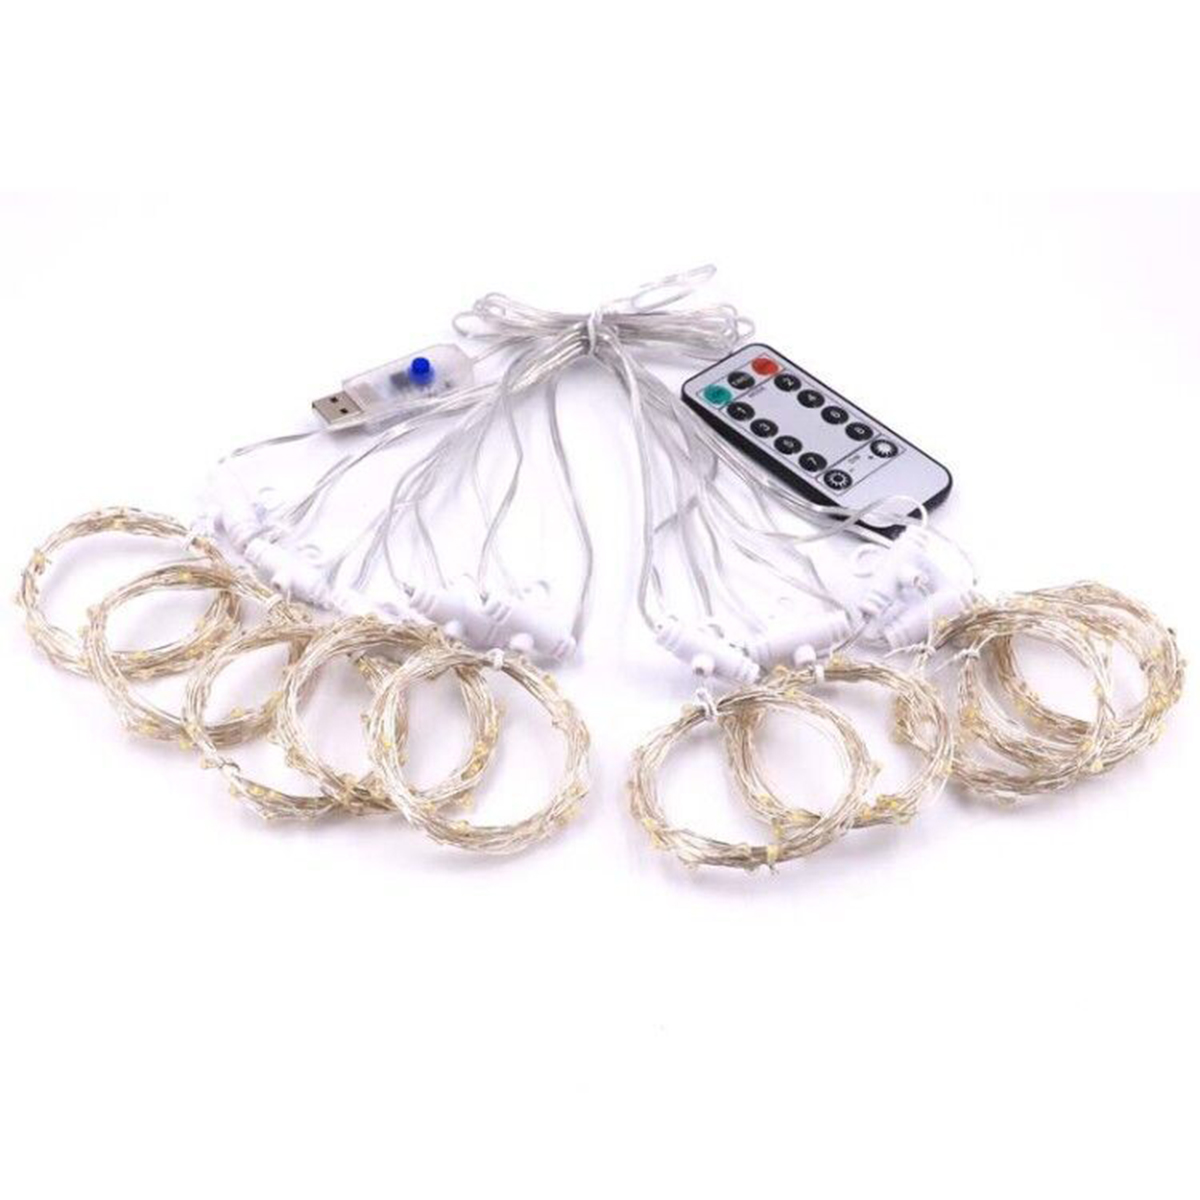 33m-300LED-USB-Waterproof-LED-Window-Curtain-String-Lights-Remote-Control-8-Modes-Fairy-Lights-Home--1745075-10